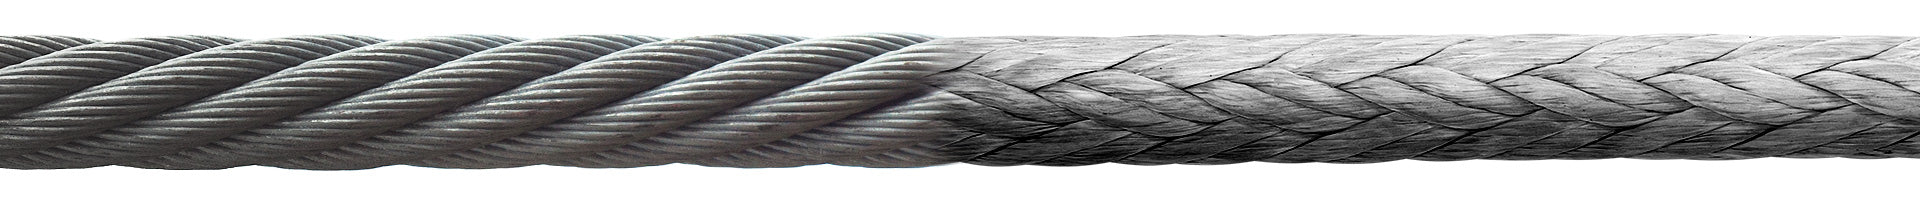 Southern Ropes' HMPE Super-12 stronger than steel